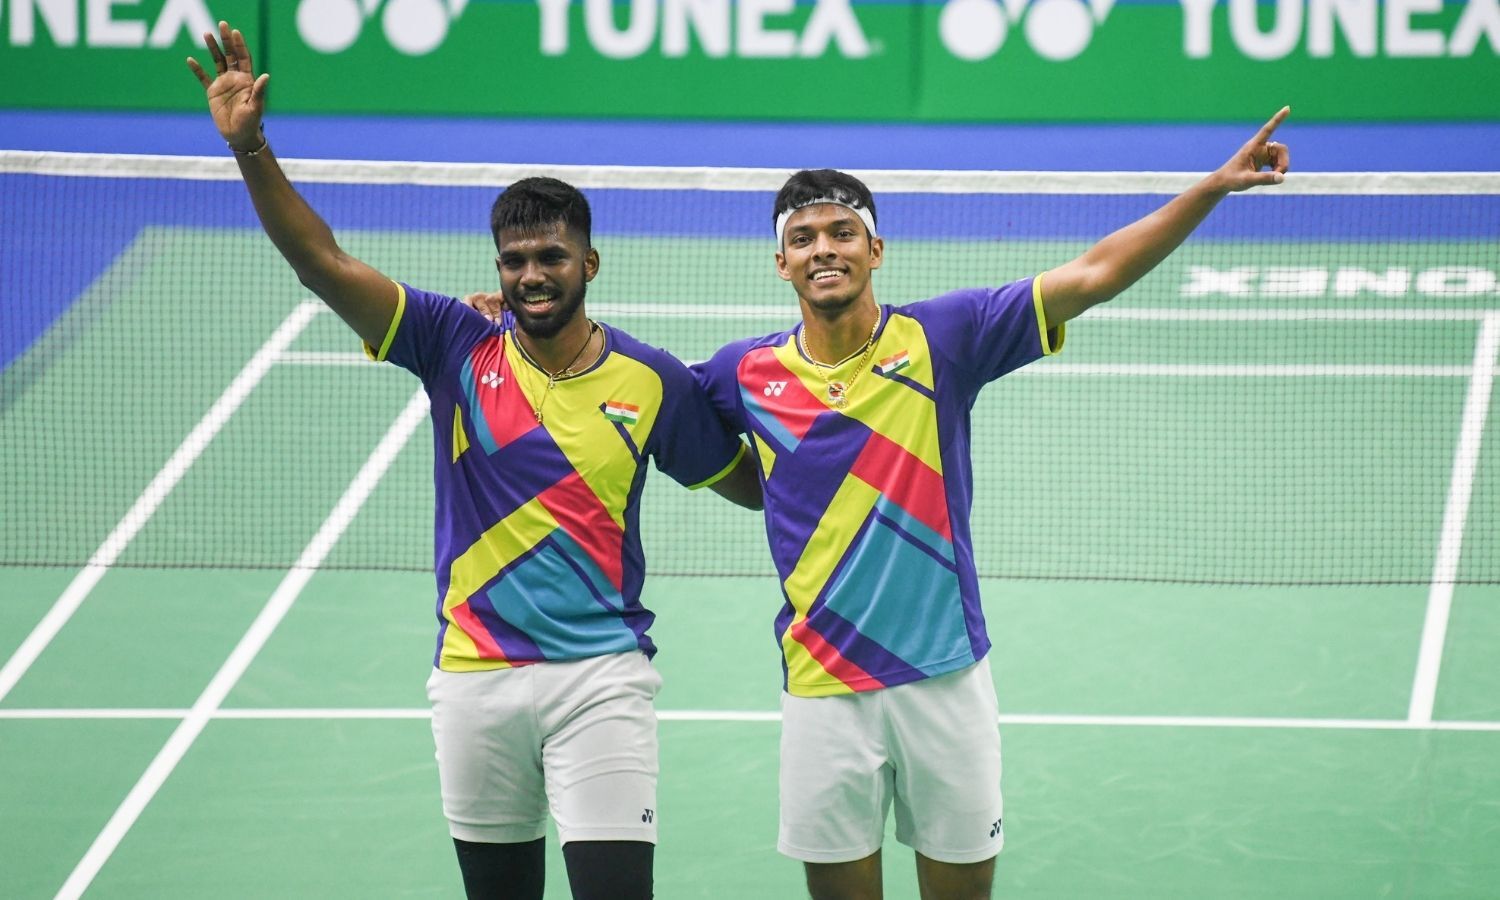 Badminton Asia Championship 2022: Draws, Schedule, Top seeds, Prize Money, LIVE streaming - All you need to know about Badminton Asia Championship 2022